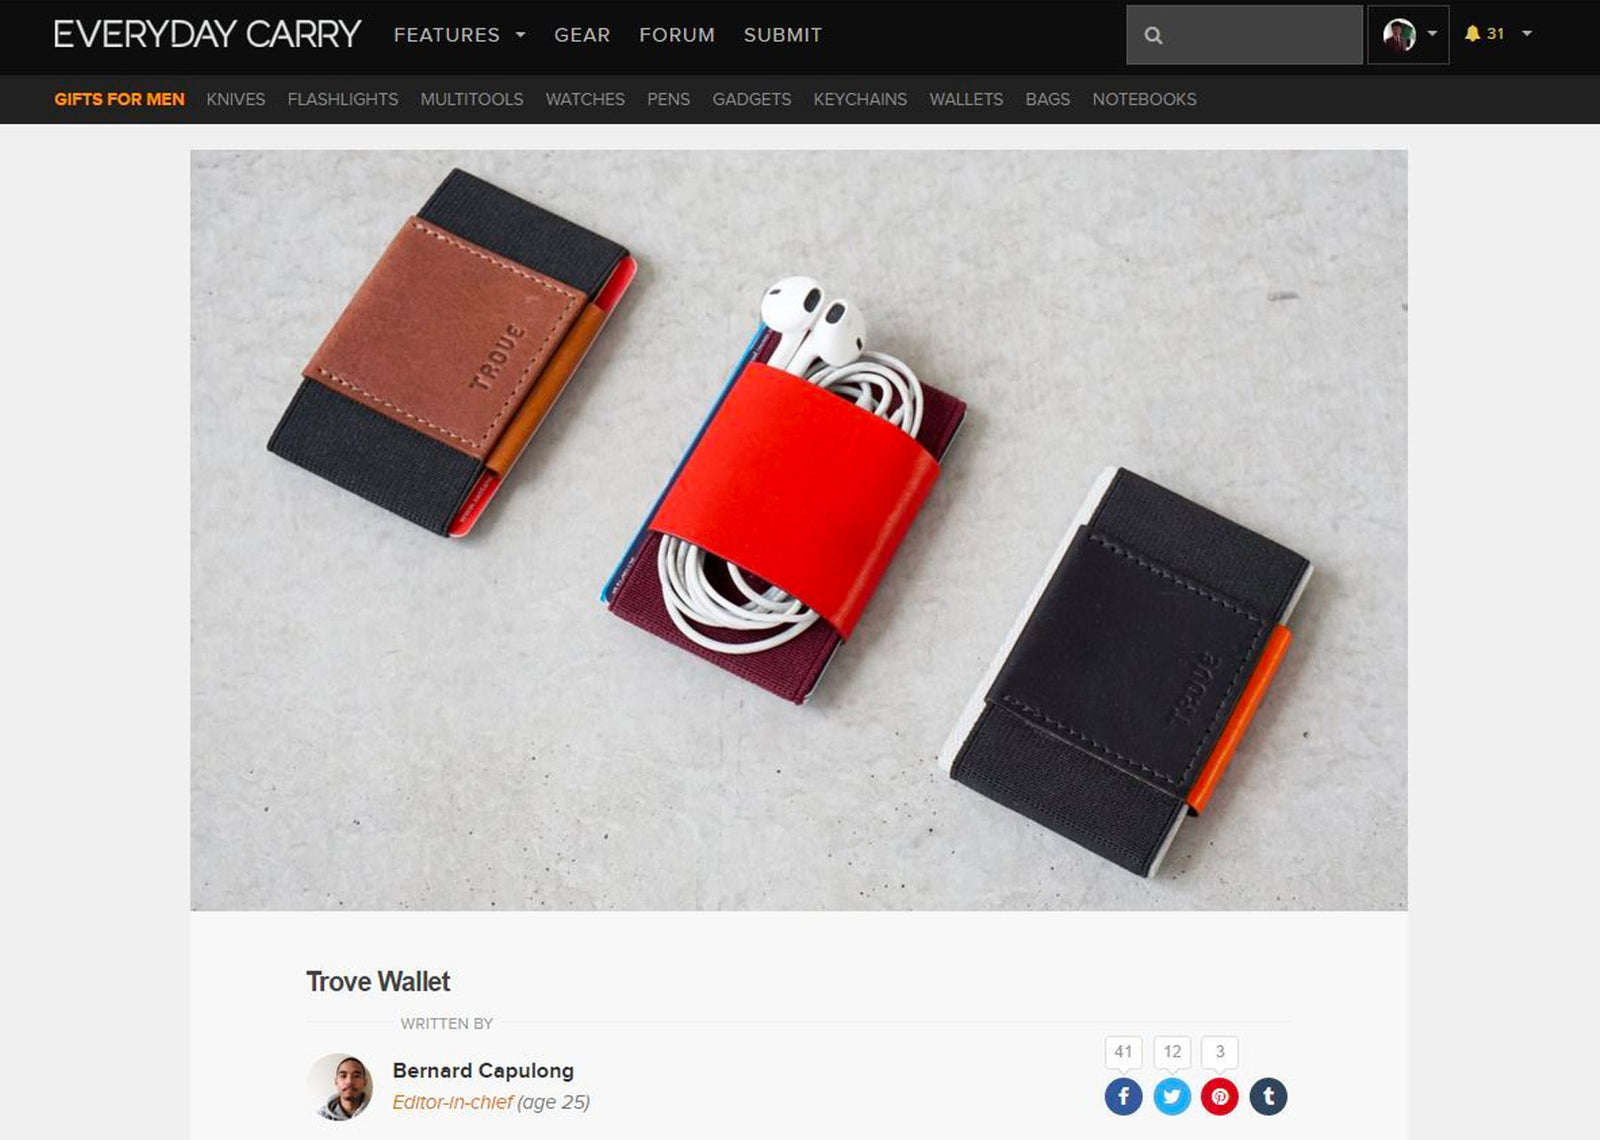 Review by Everydaycarry.com